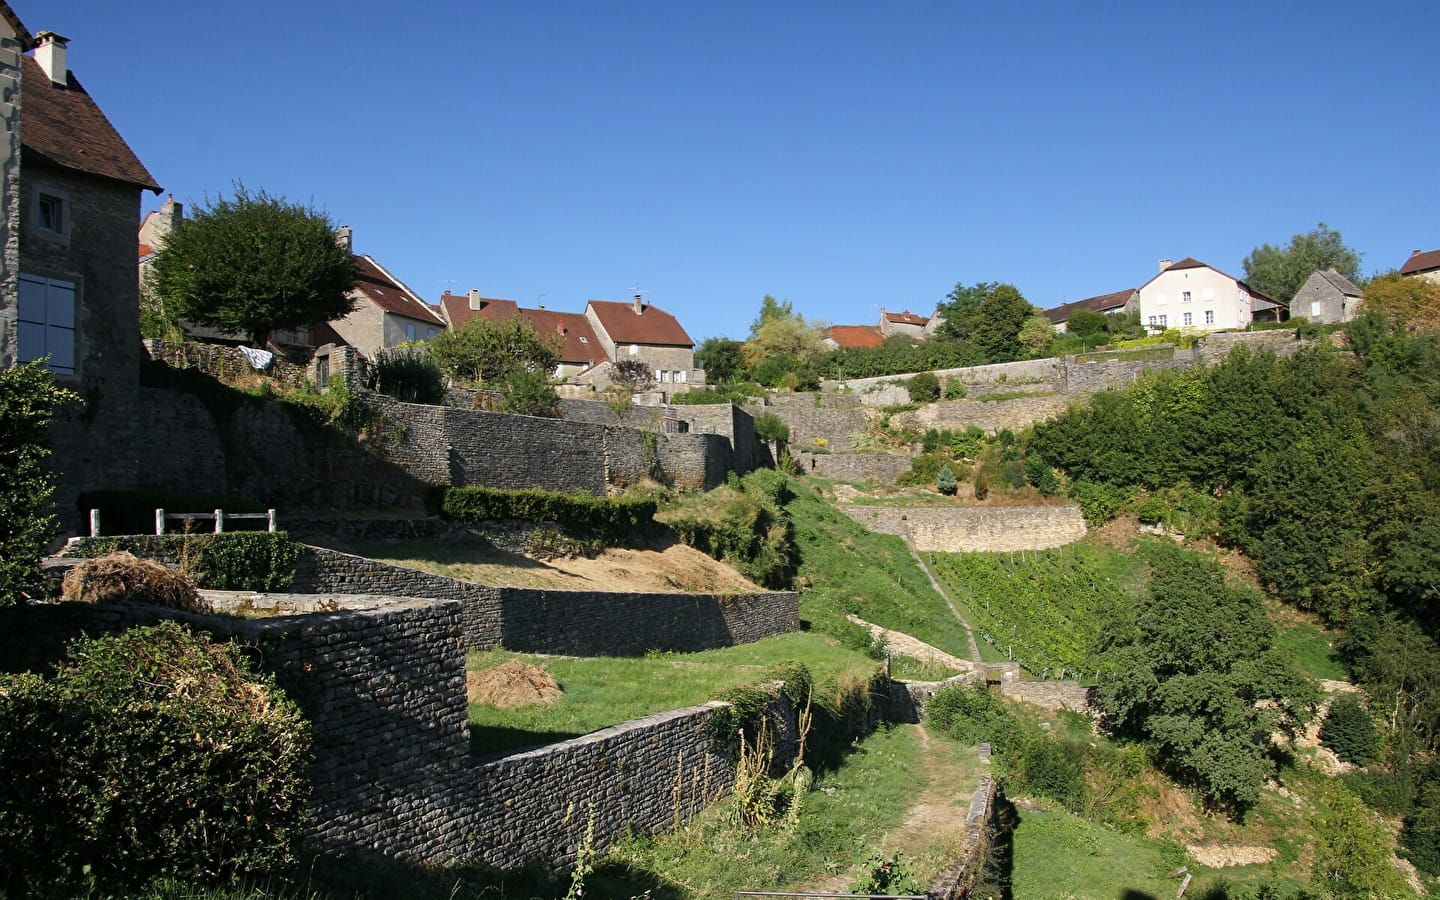 Diversions to the Most Beautiful Villages in France